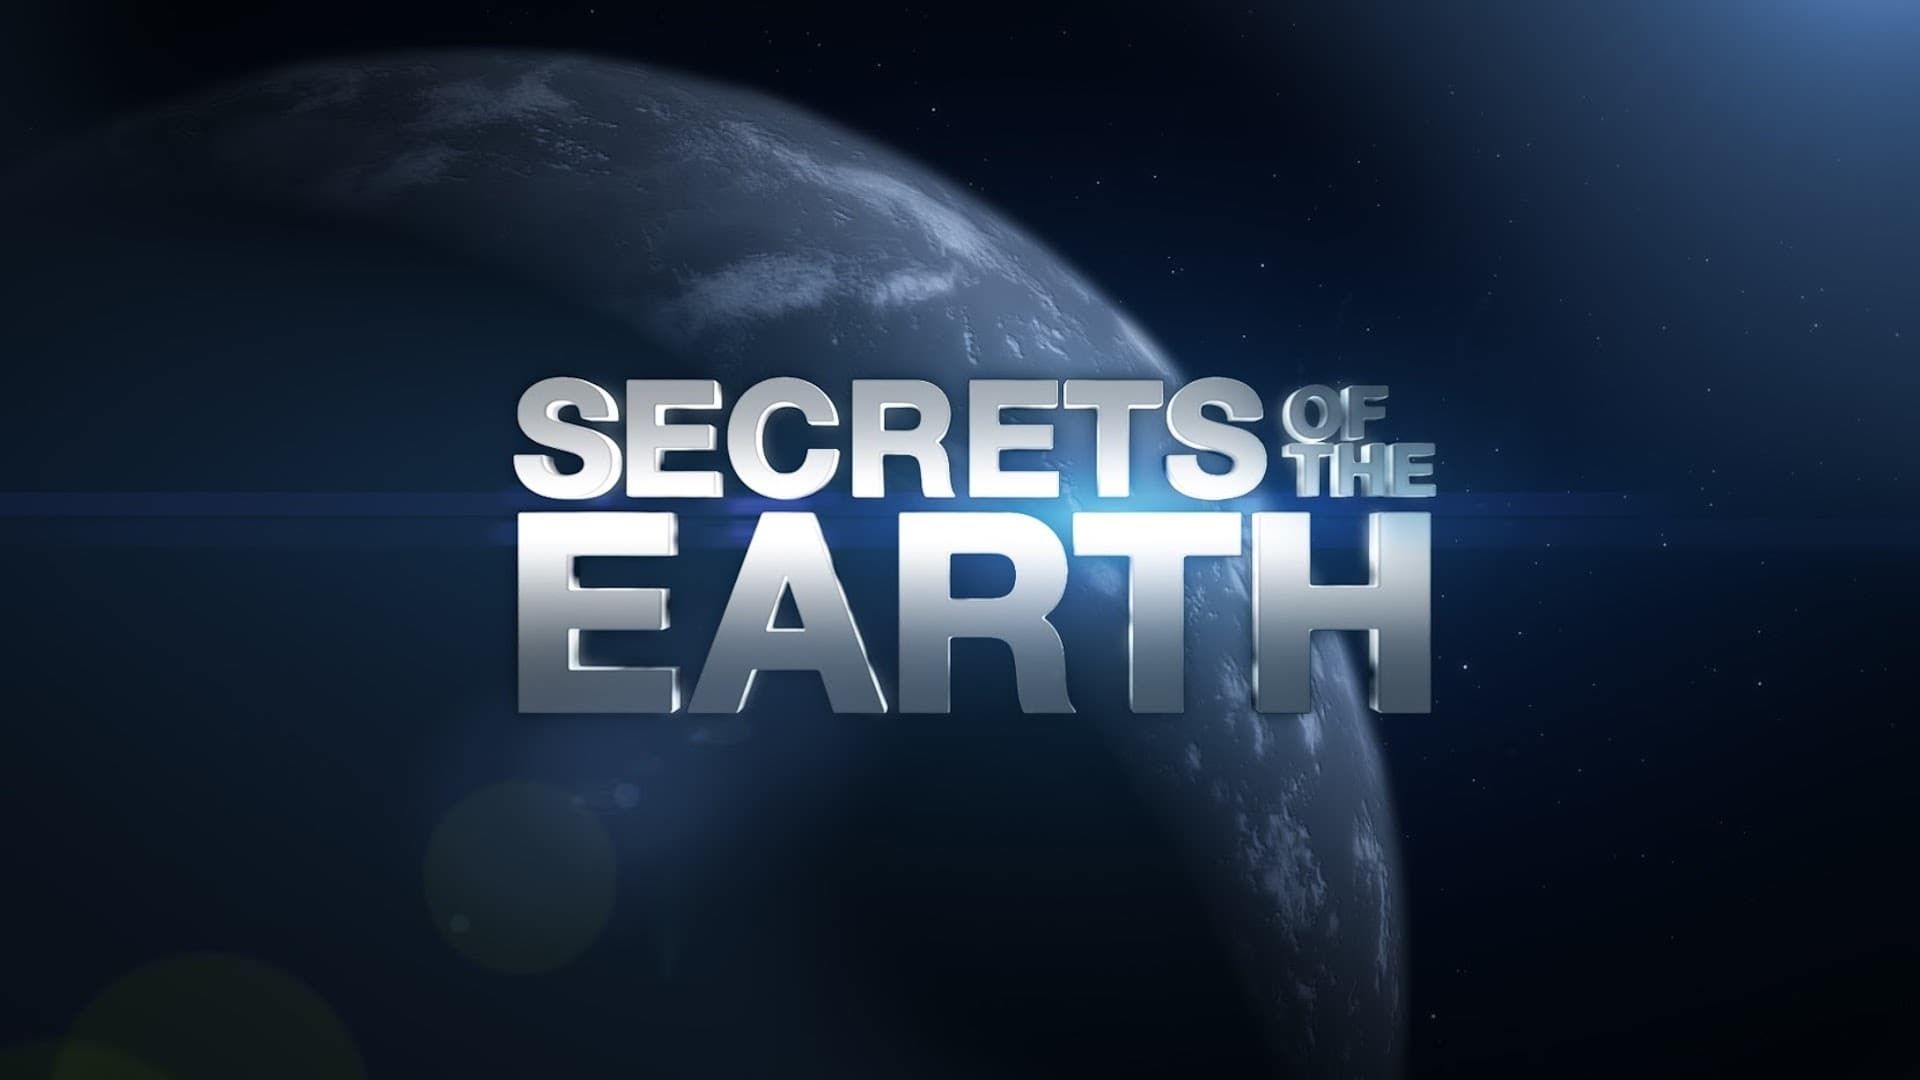 Secrets of the Earth background